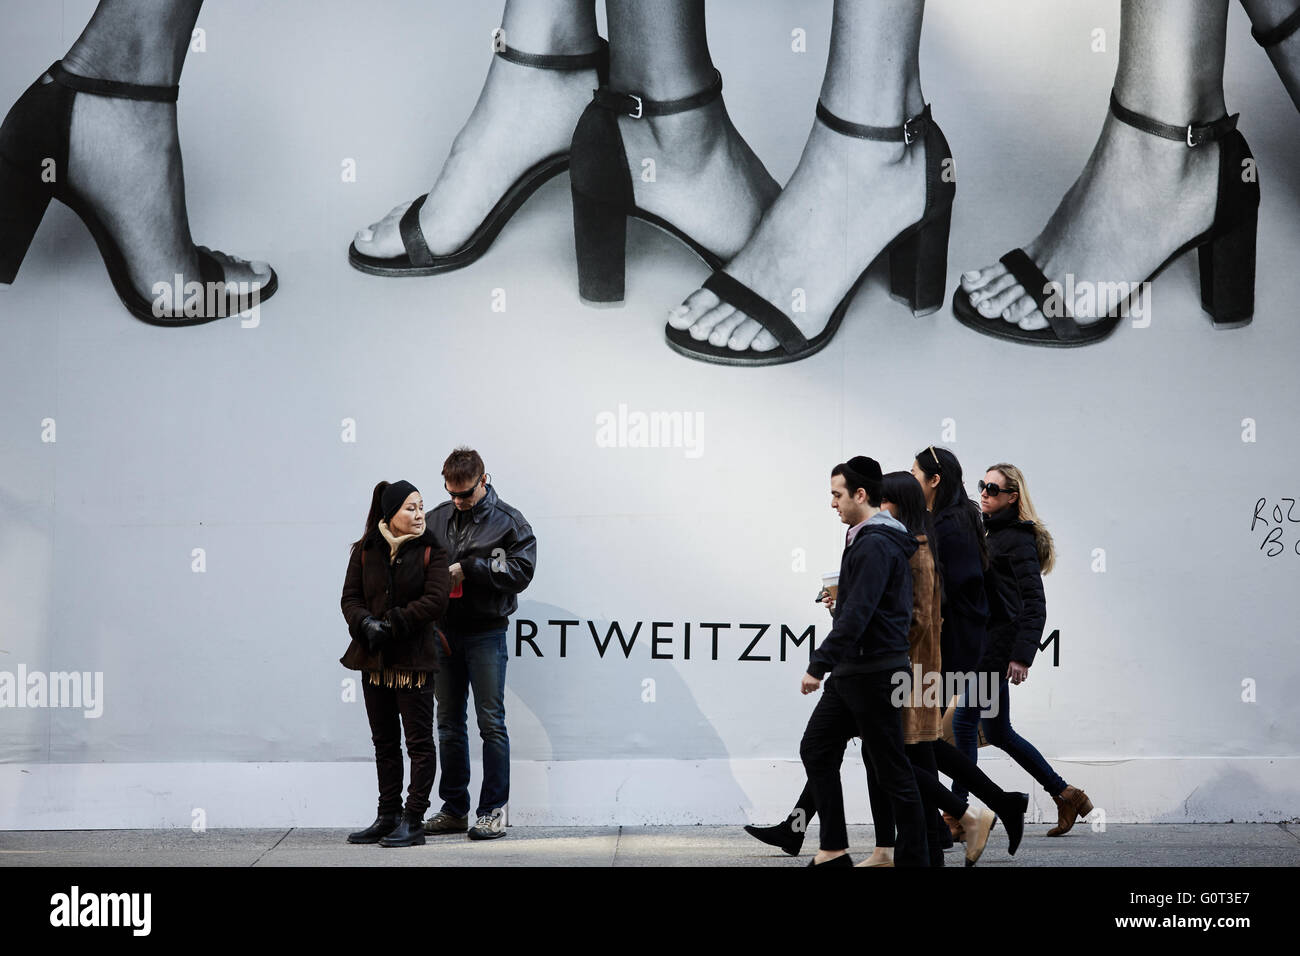 New york   Large oversized advert on 5th avenue covering shops people walking on sidewalk high heel feet shoes Stock Photo